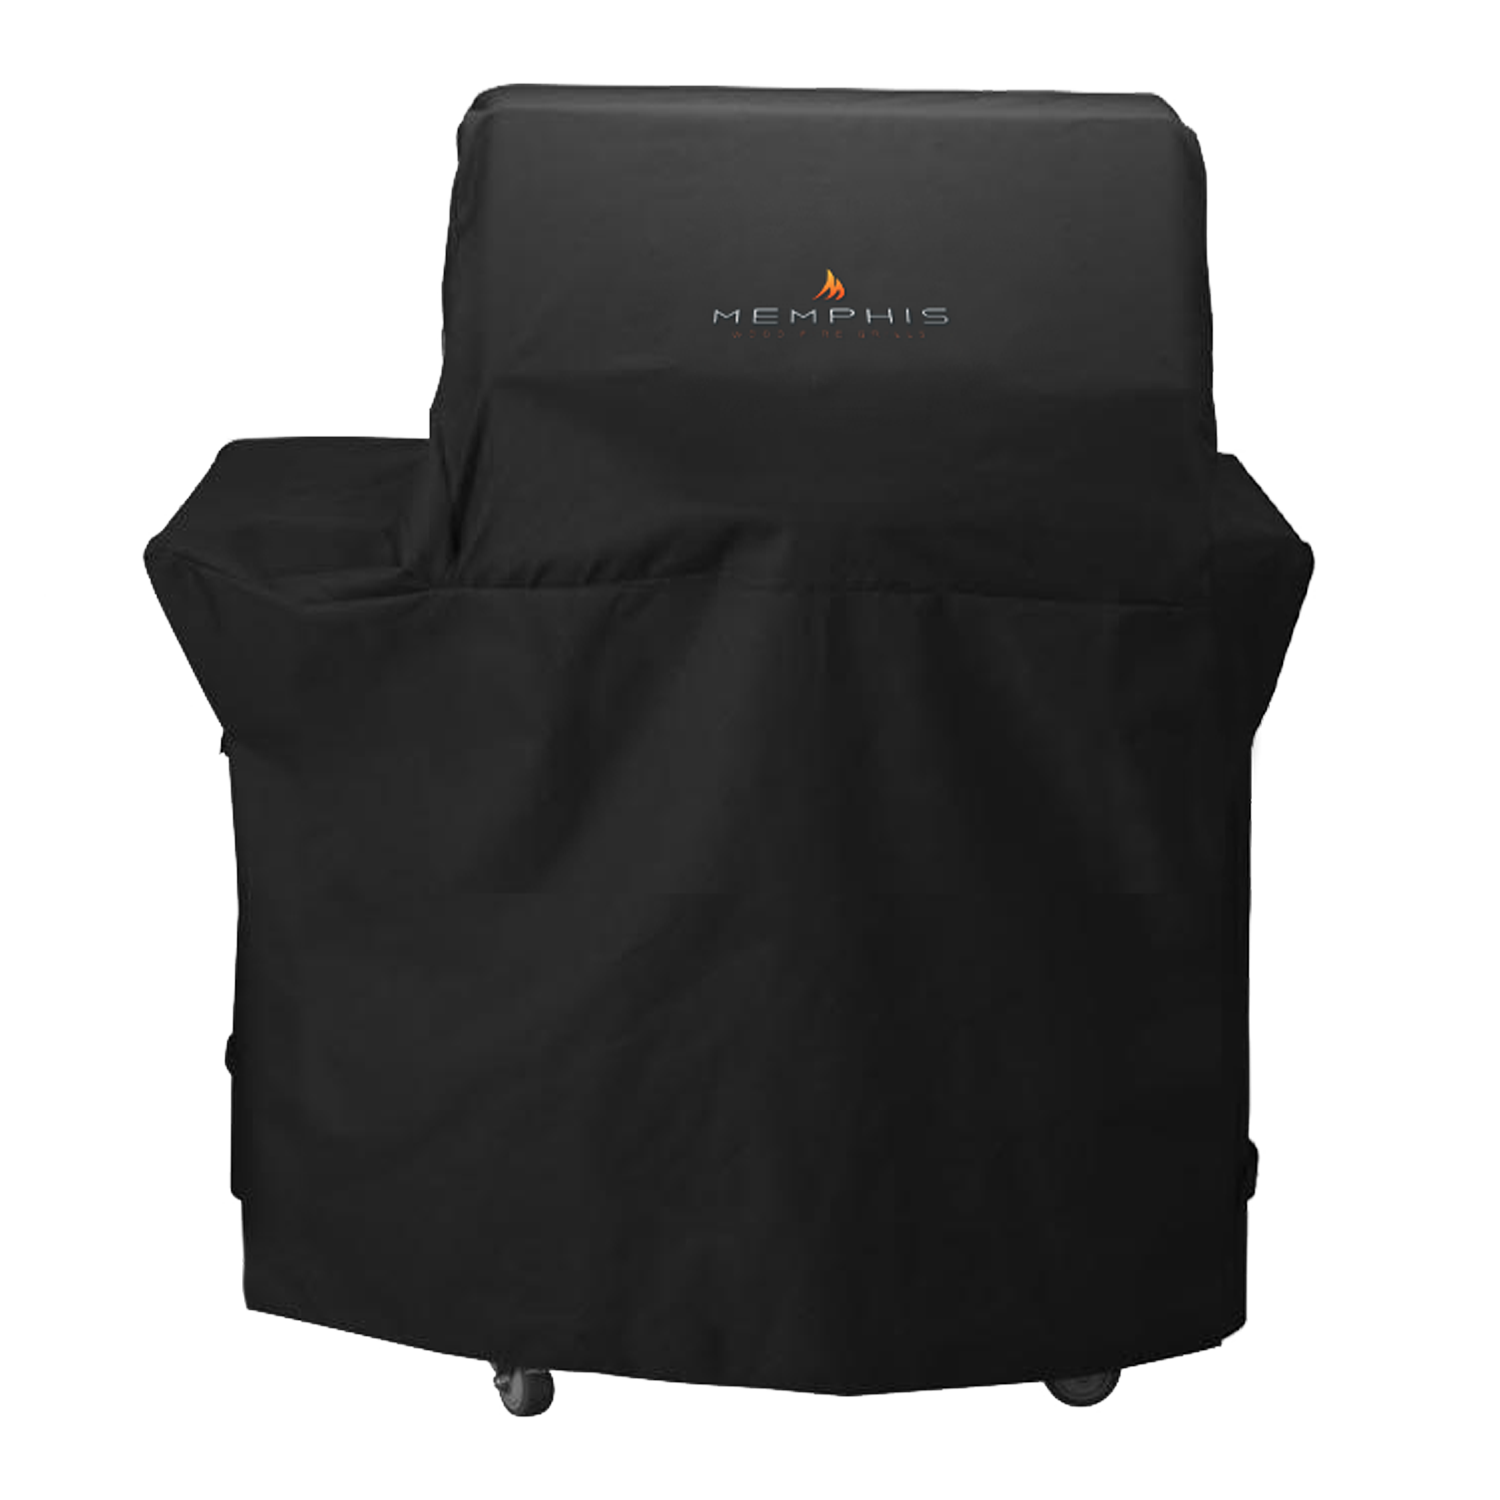 Memphis Kit 3 and 4 Black Polyester Cover for Elevate Cart ITC2 Pellet Grill